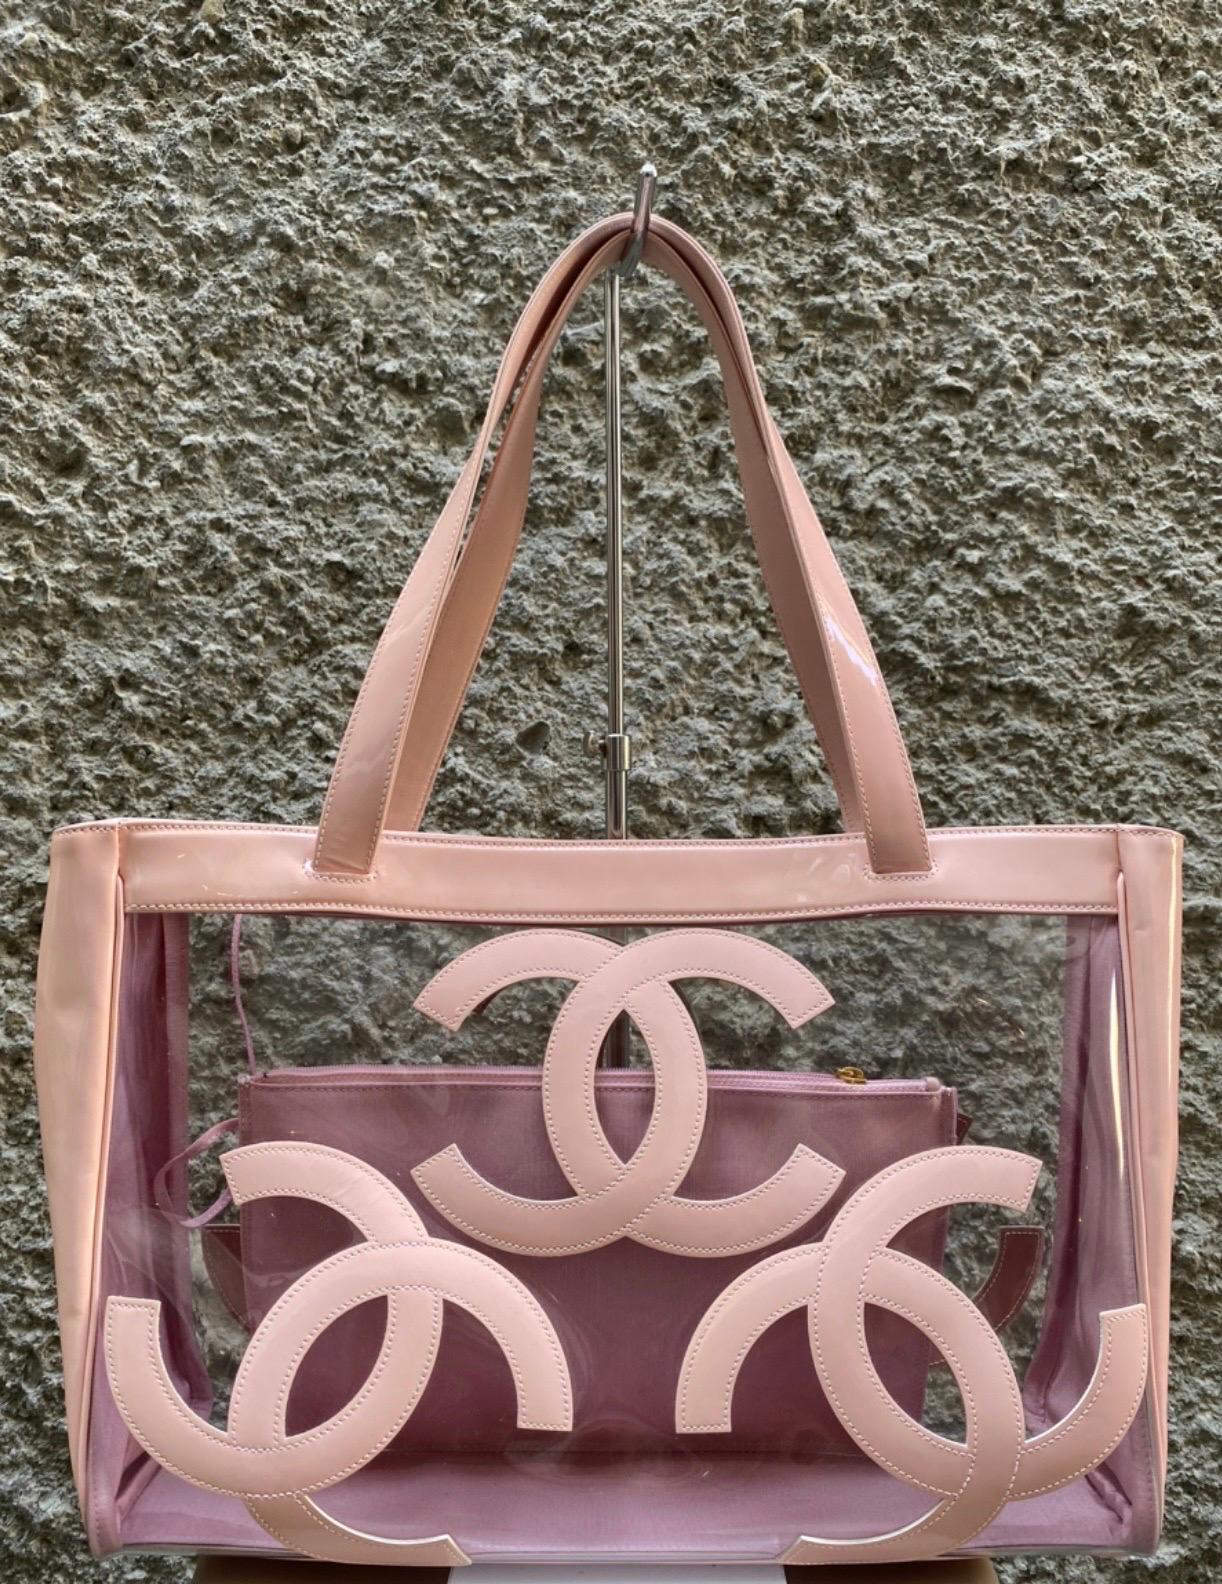 Chanel pvc bag, in pink patent leather with transparent parts in pvc, dimensions: length 43 cm, height 28 cm, width 12 cm, handles height 23 cm, inside there is a document pouch, in very good condition